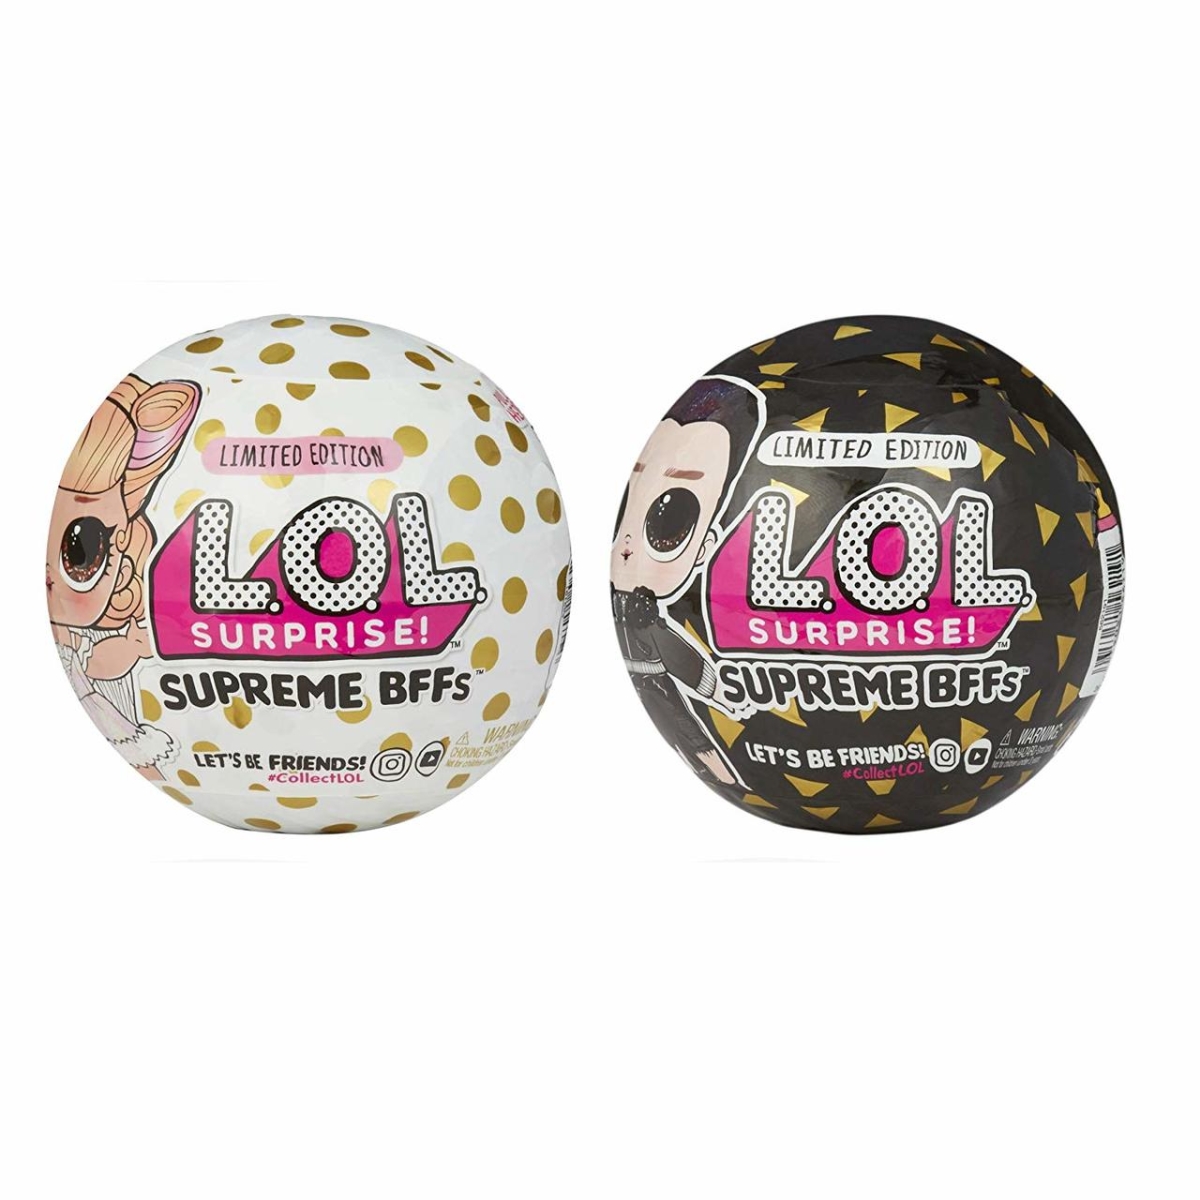 30372950 Lol Surprise Supreme Bffs Limited Edition - Pack Of 2